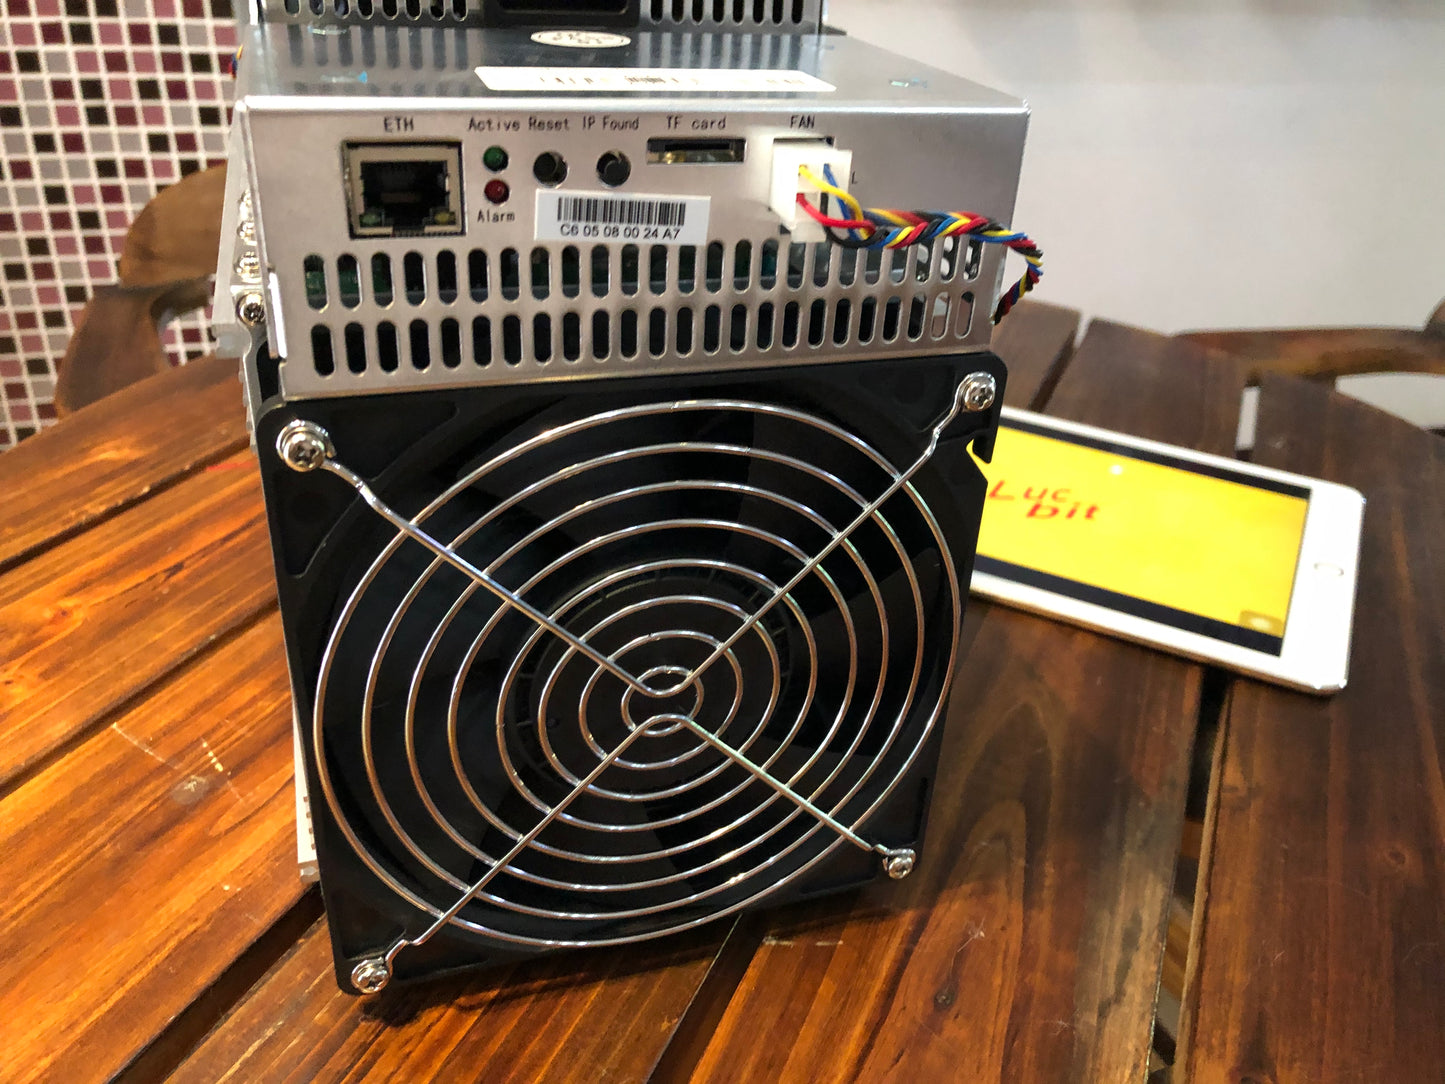 Whatsminer M31S 76TH/S (Used)